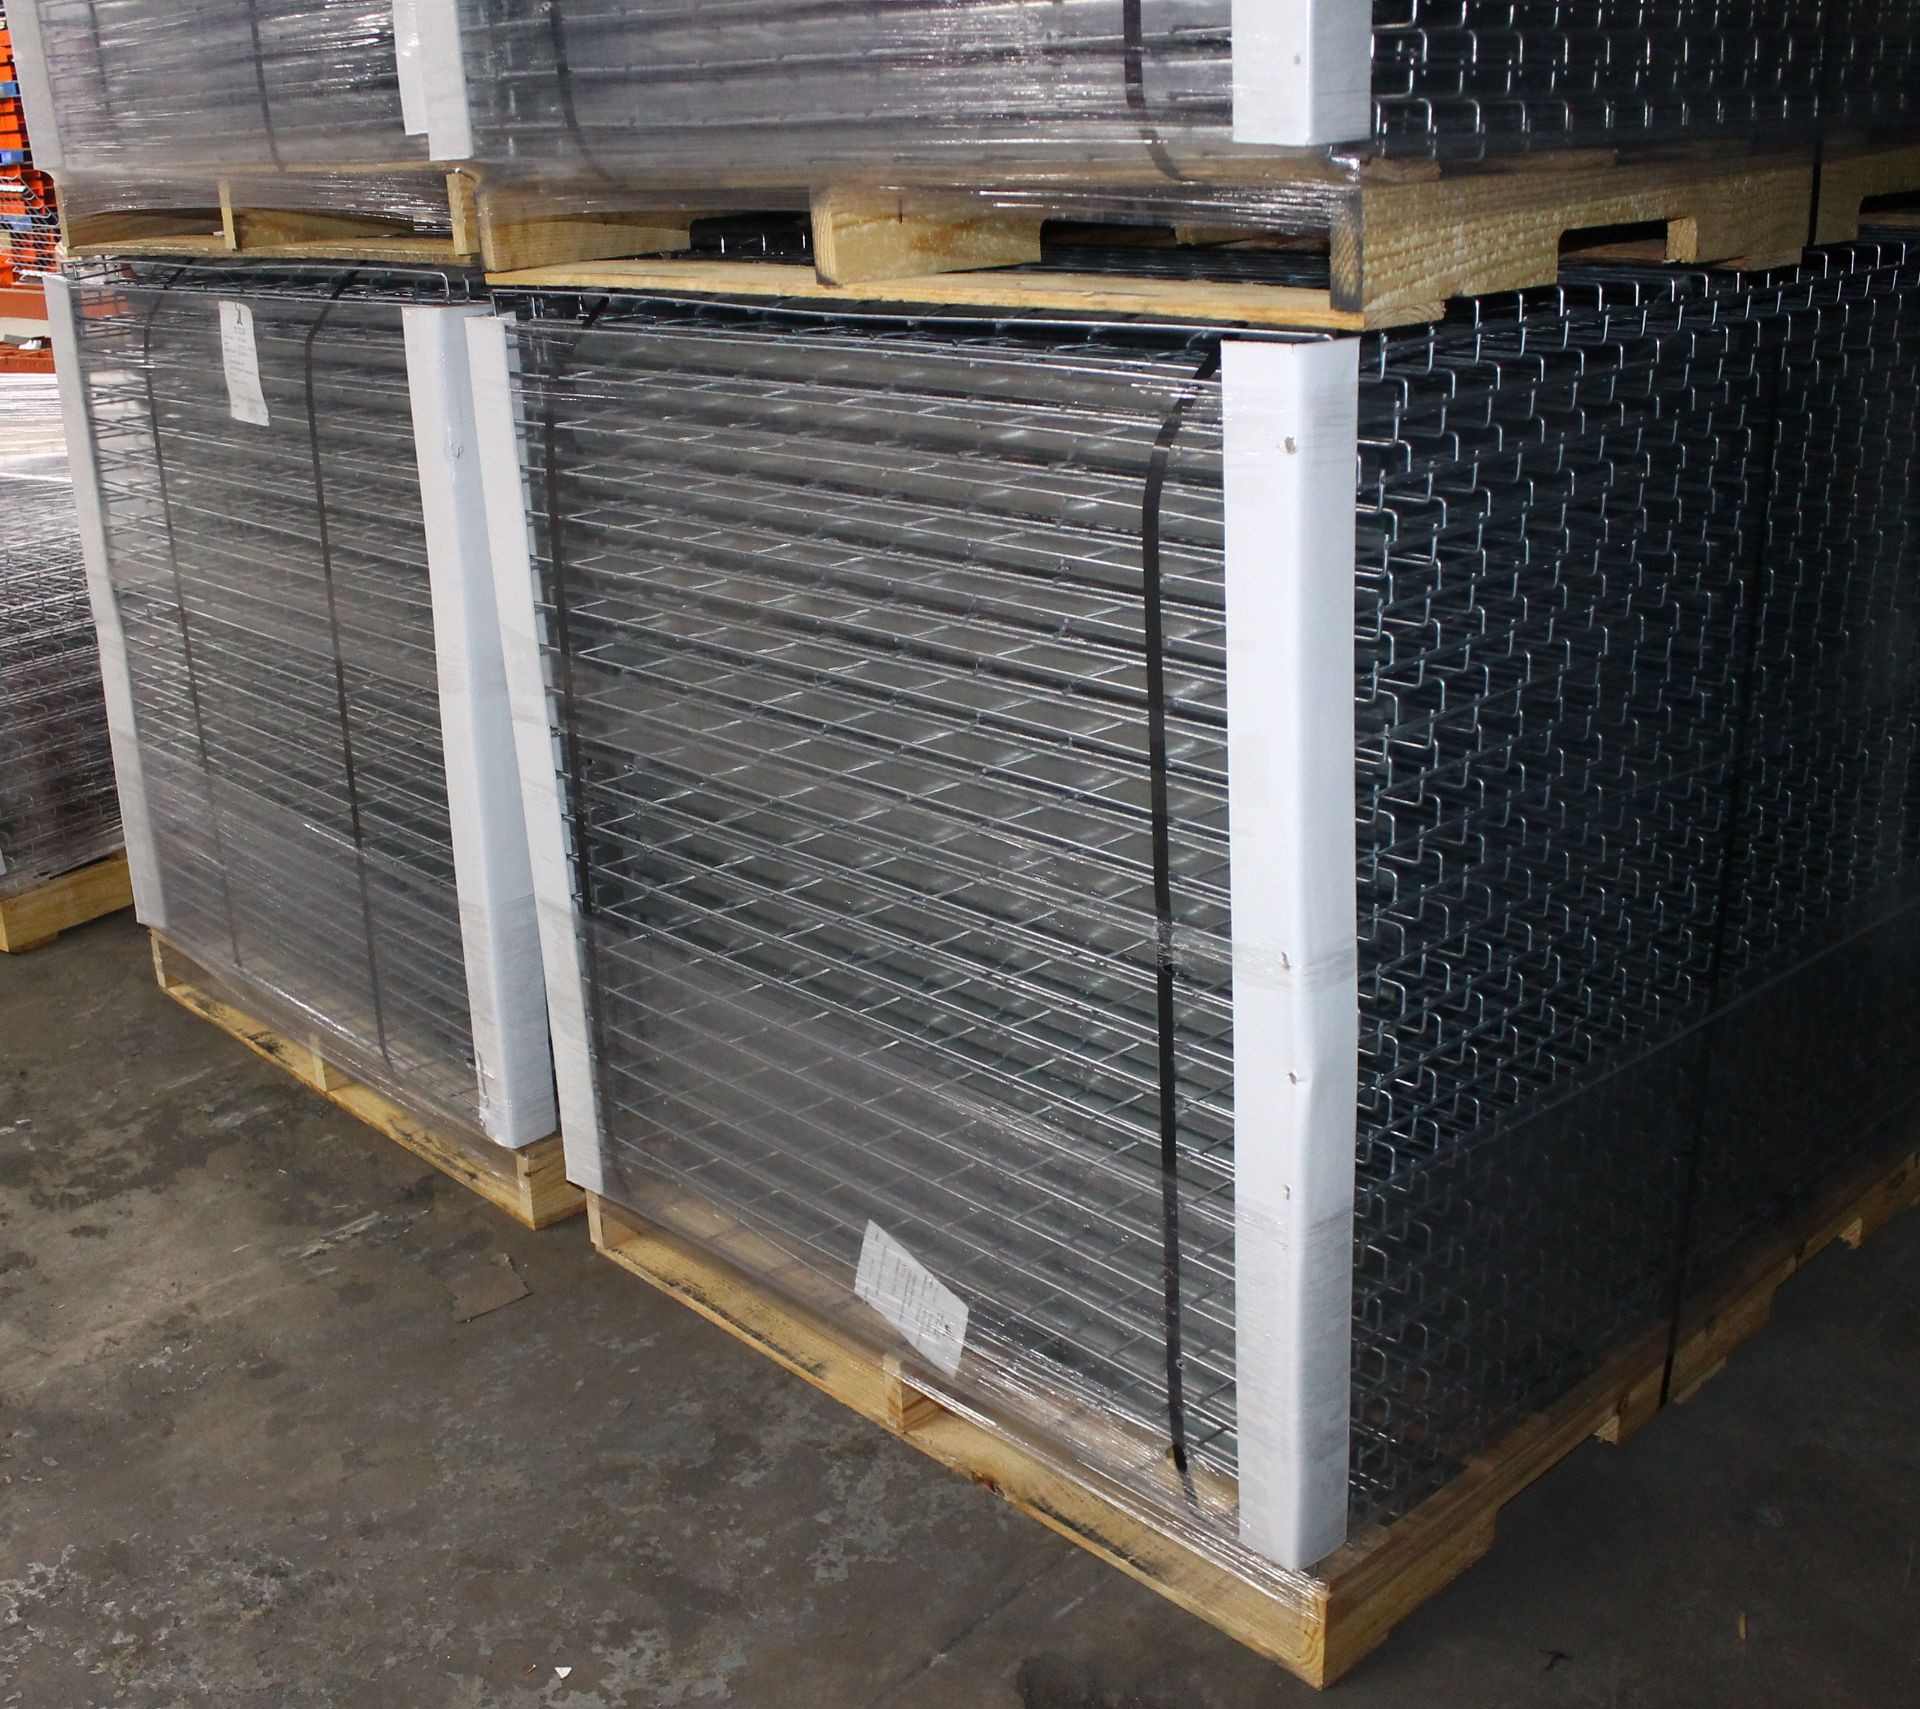 NEW 80 PCS OF STANDARD 42" X 52" WIREDECK - 2250 LBS CAPACITY - Image 2 of 3